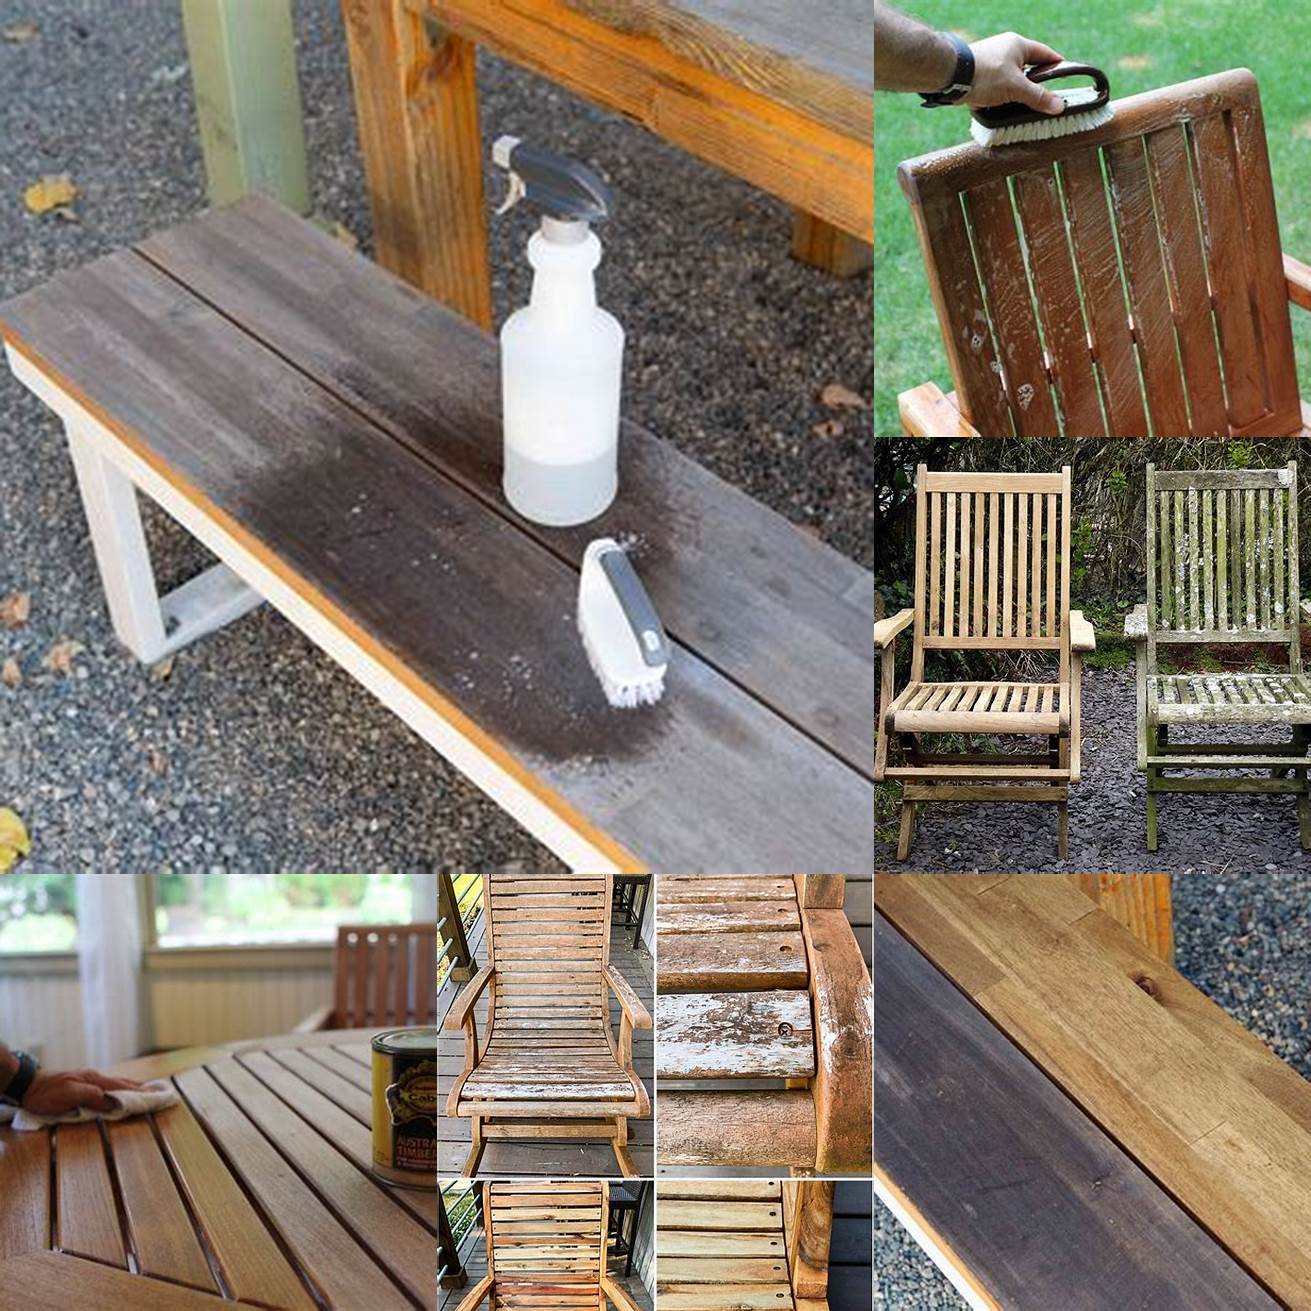 Image of Teak Furniture After Cleaning